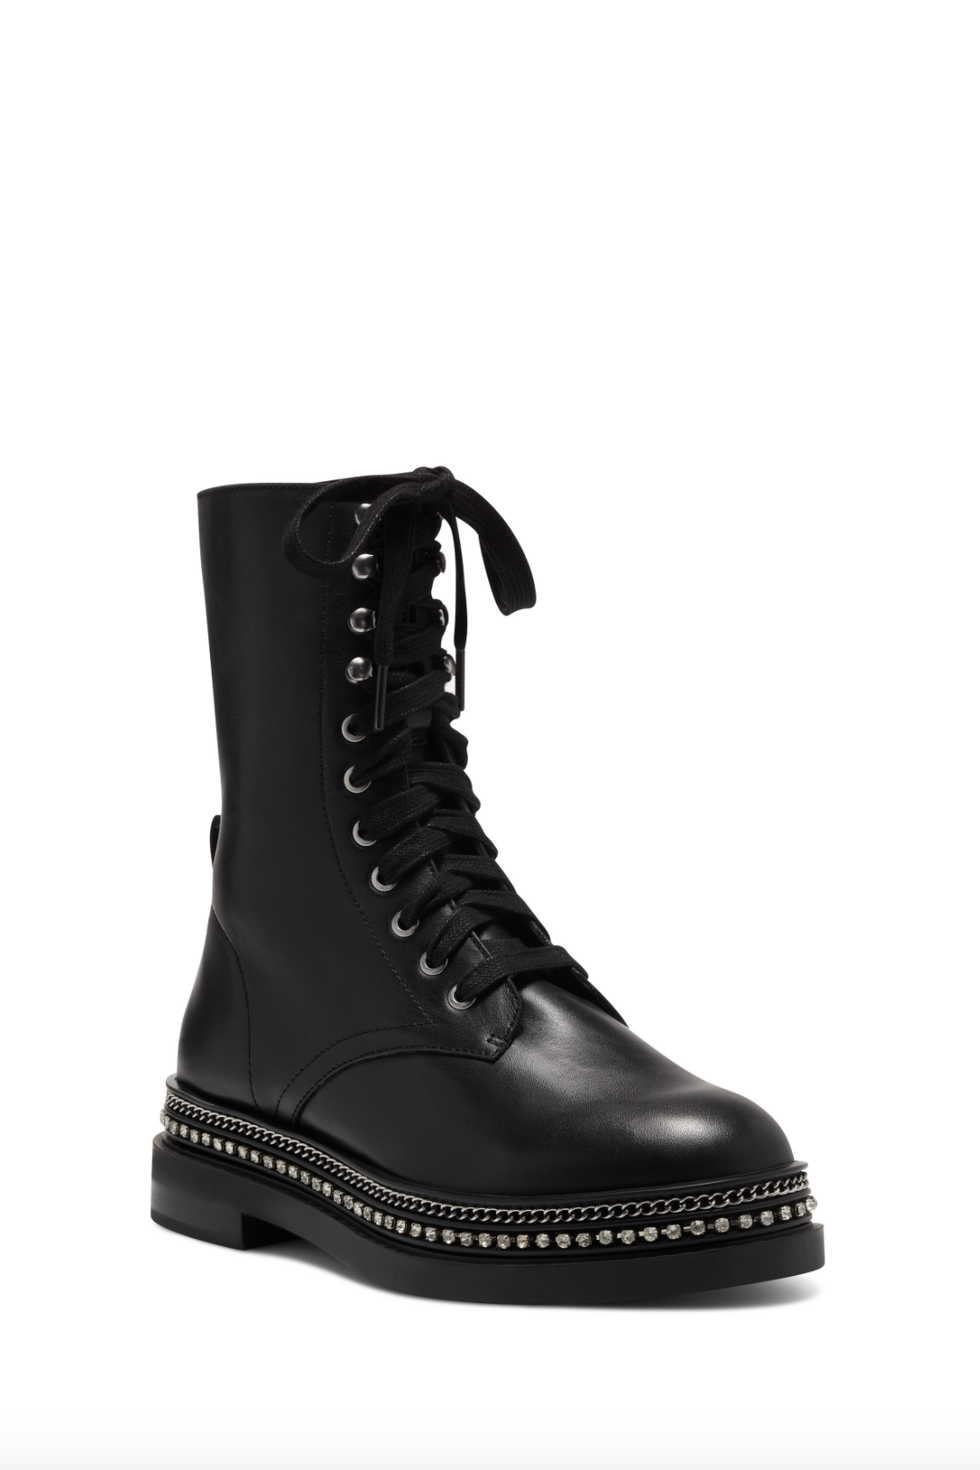 Best Combat Boots for Women 2021 - Top Lace-Up Military Style Boots